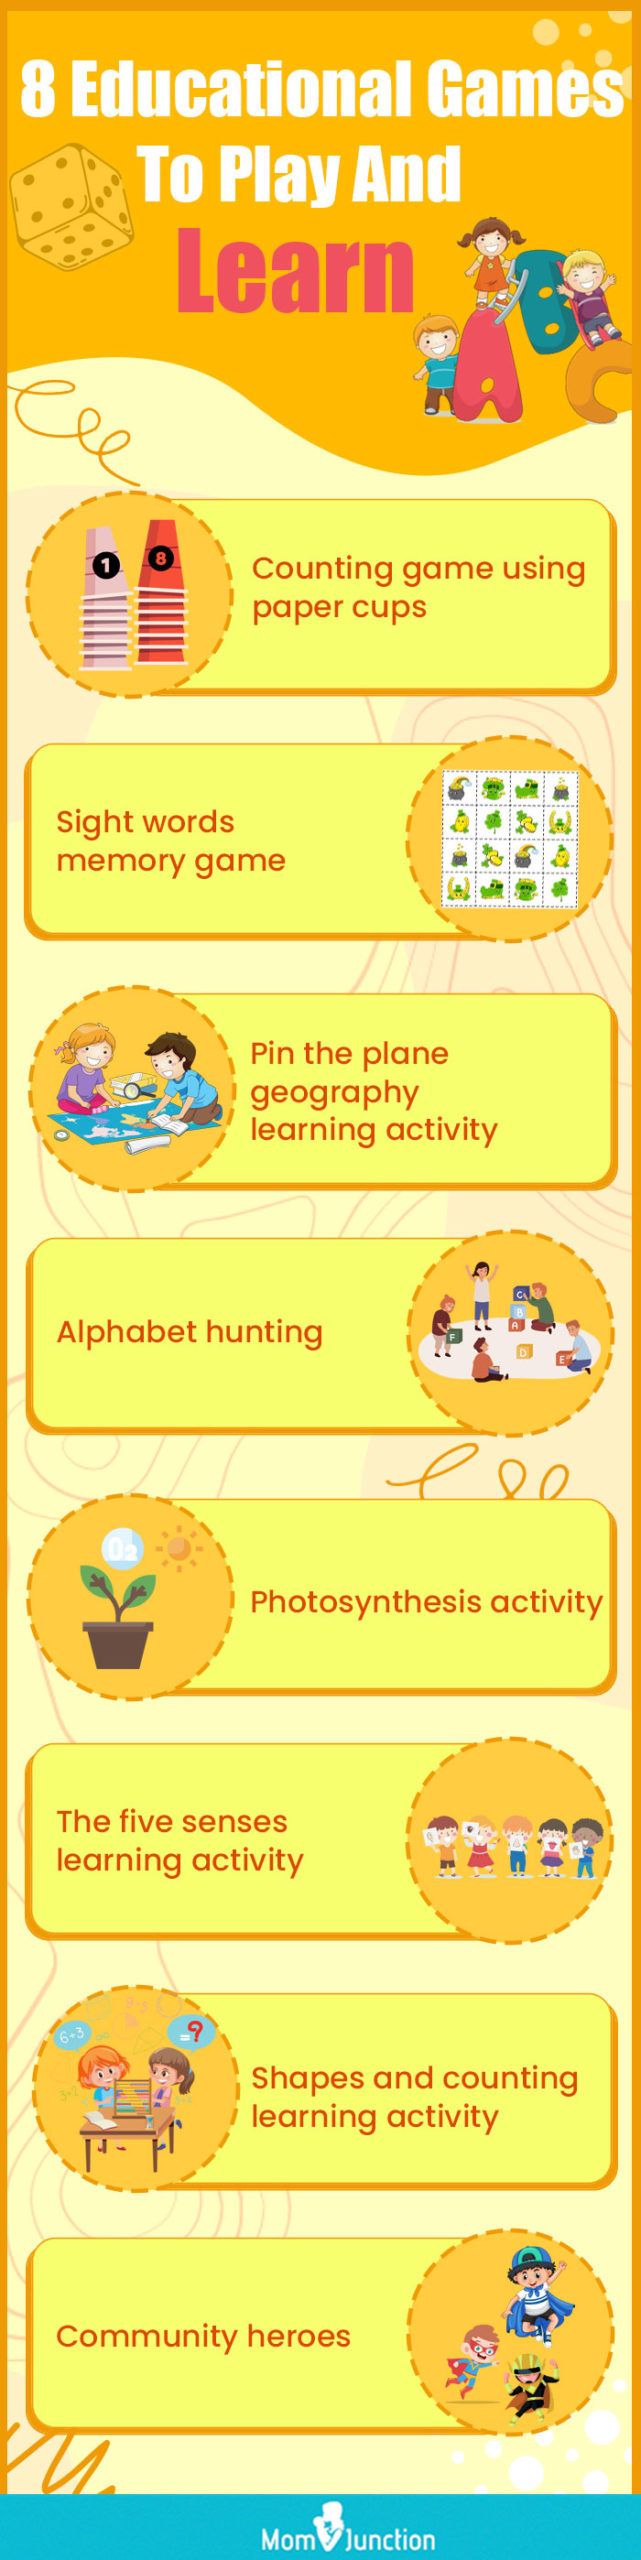 8 educational games to play and learn [infographic]